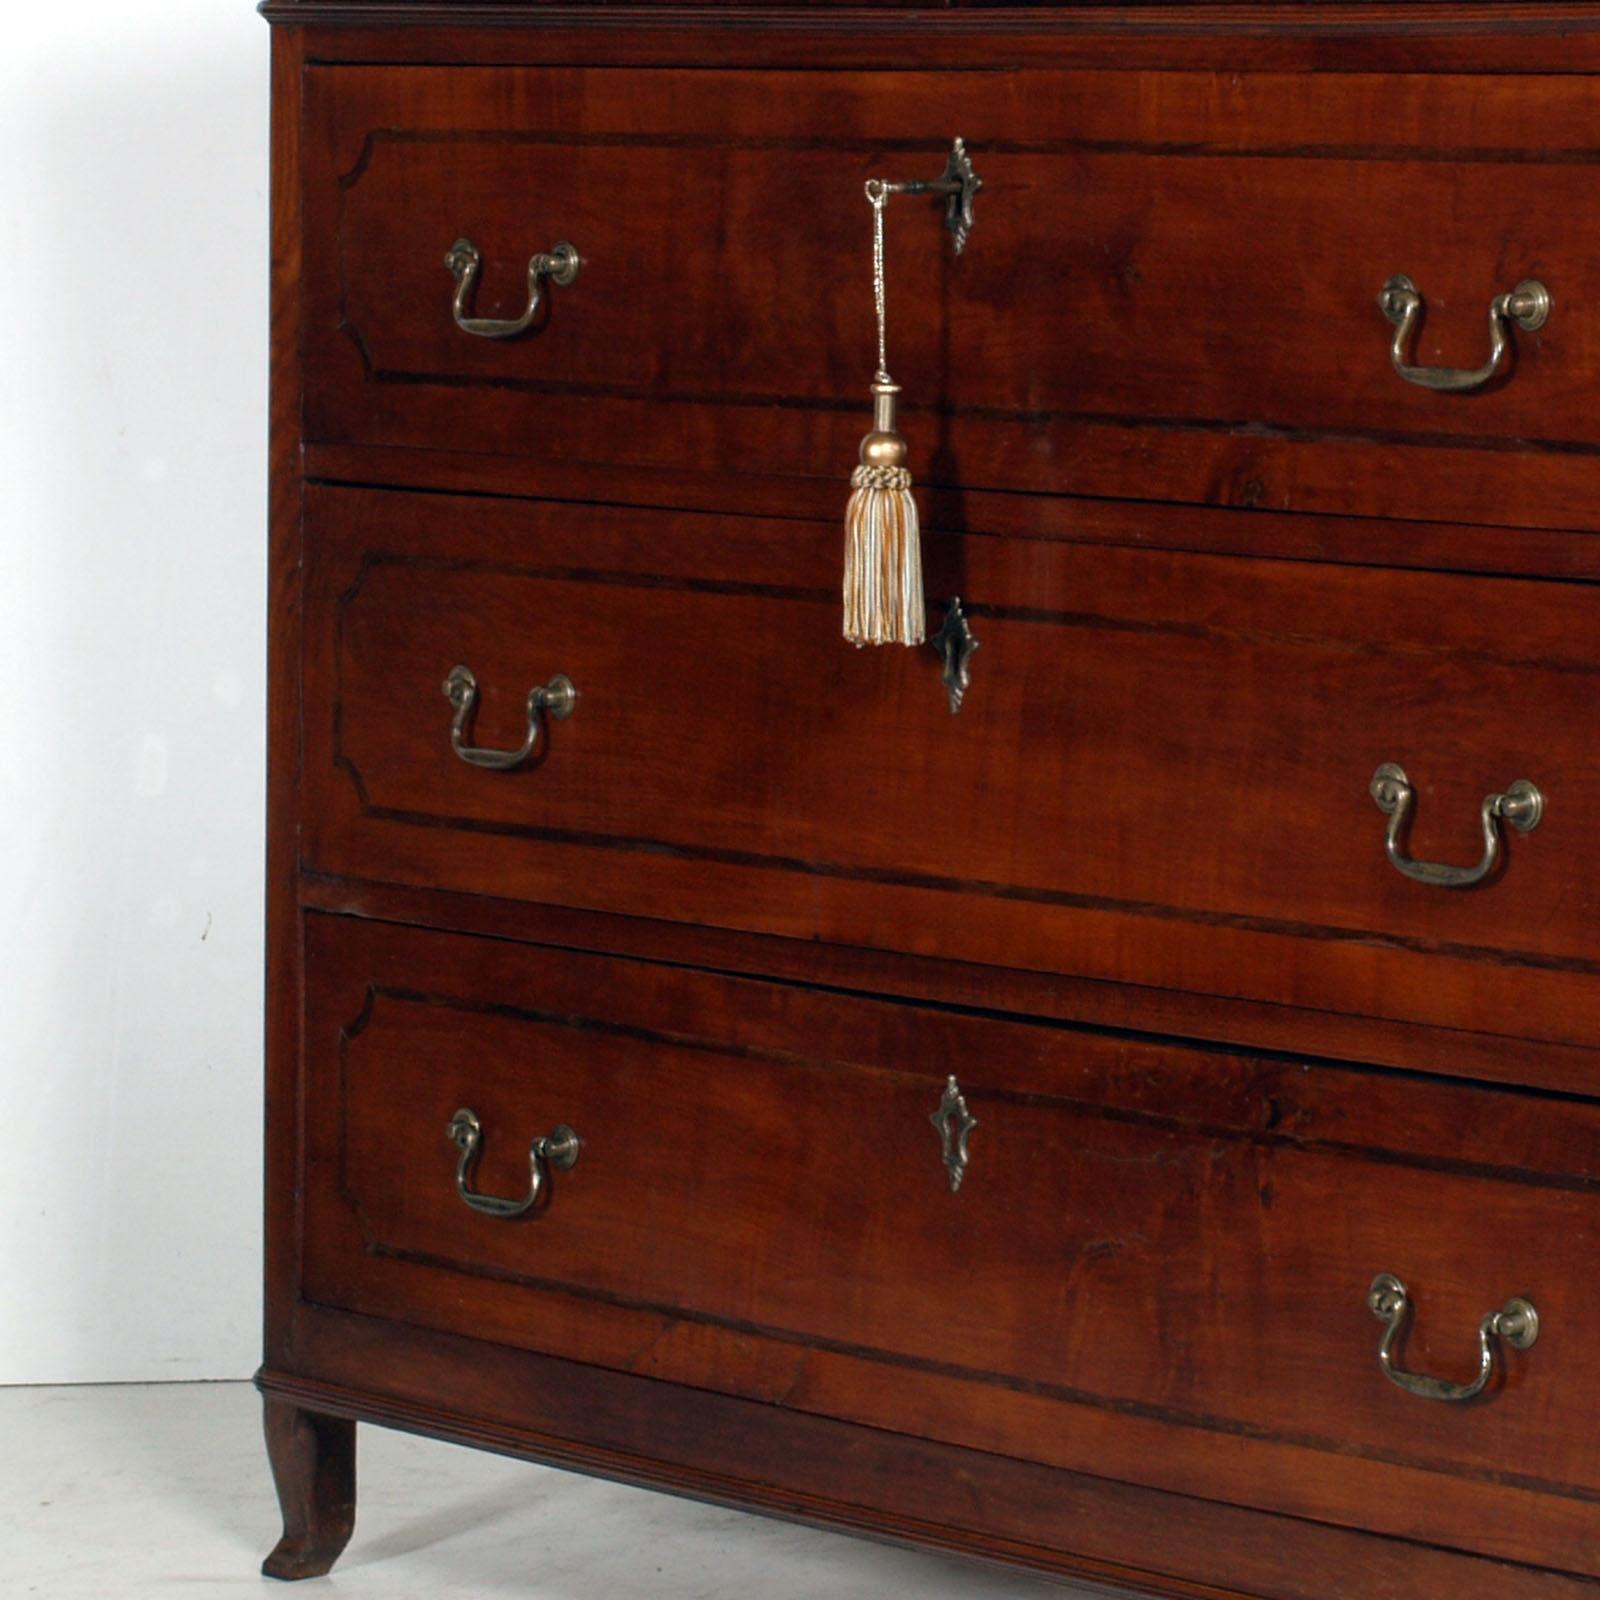 Inlay Late 18th Century, Antique Italian Commode Chest of Drawers, Walnut, with Inlaid For Sale